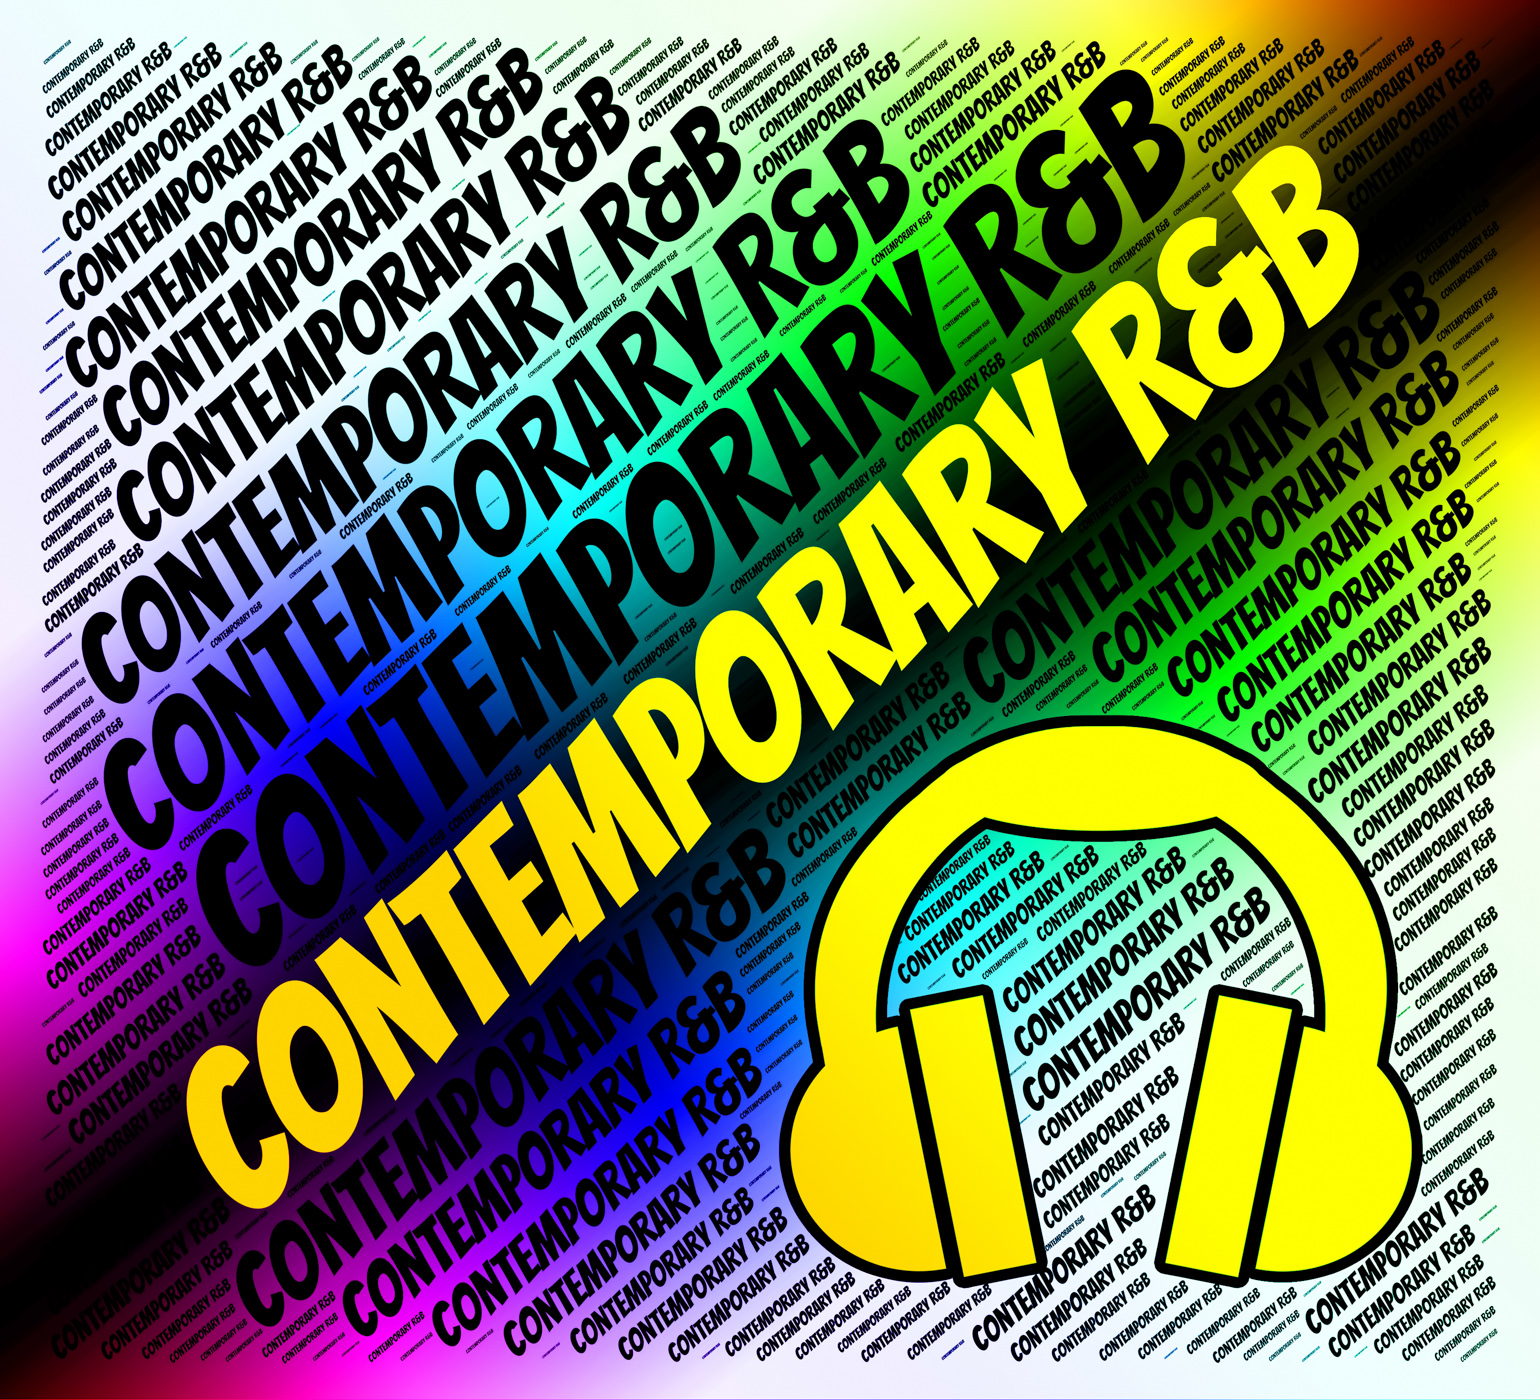 Contemporary rb represents rhythm and blues and rnb photo